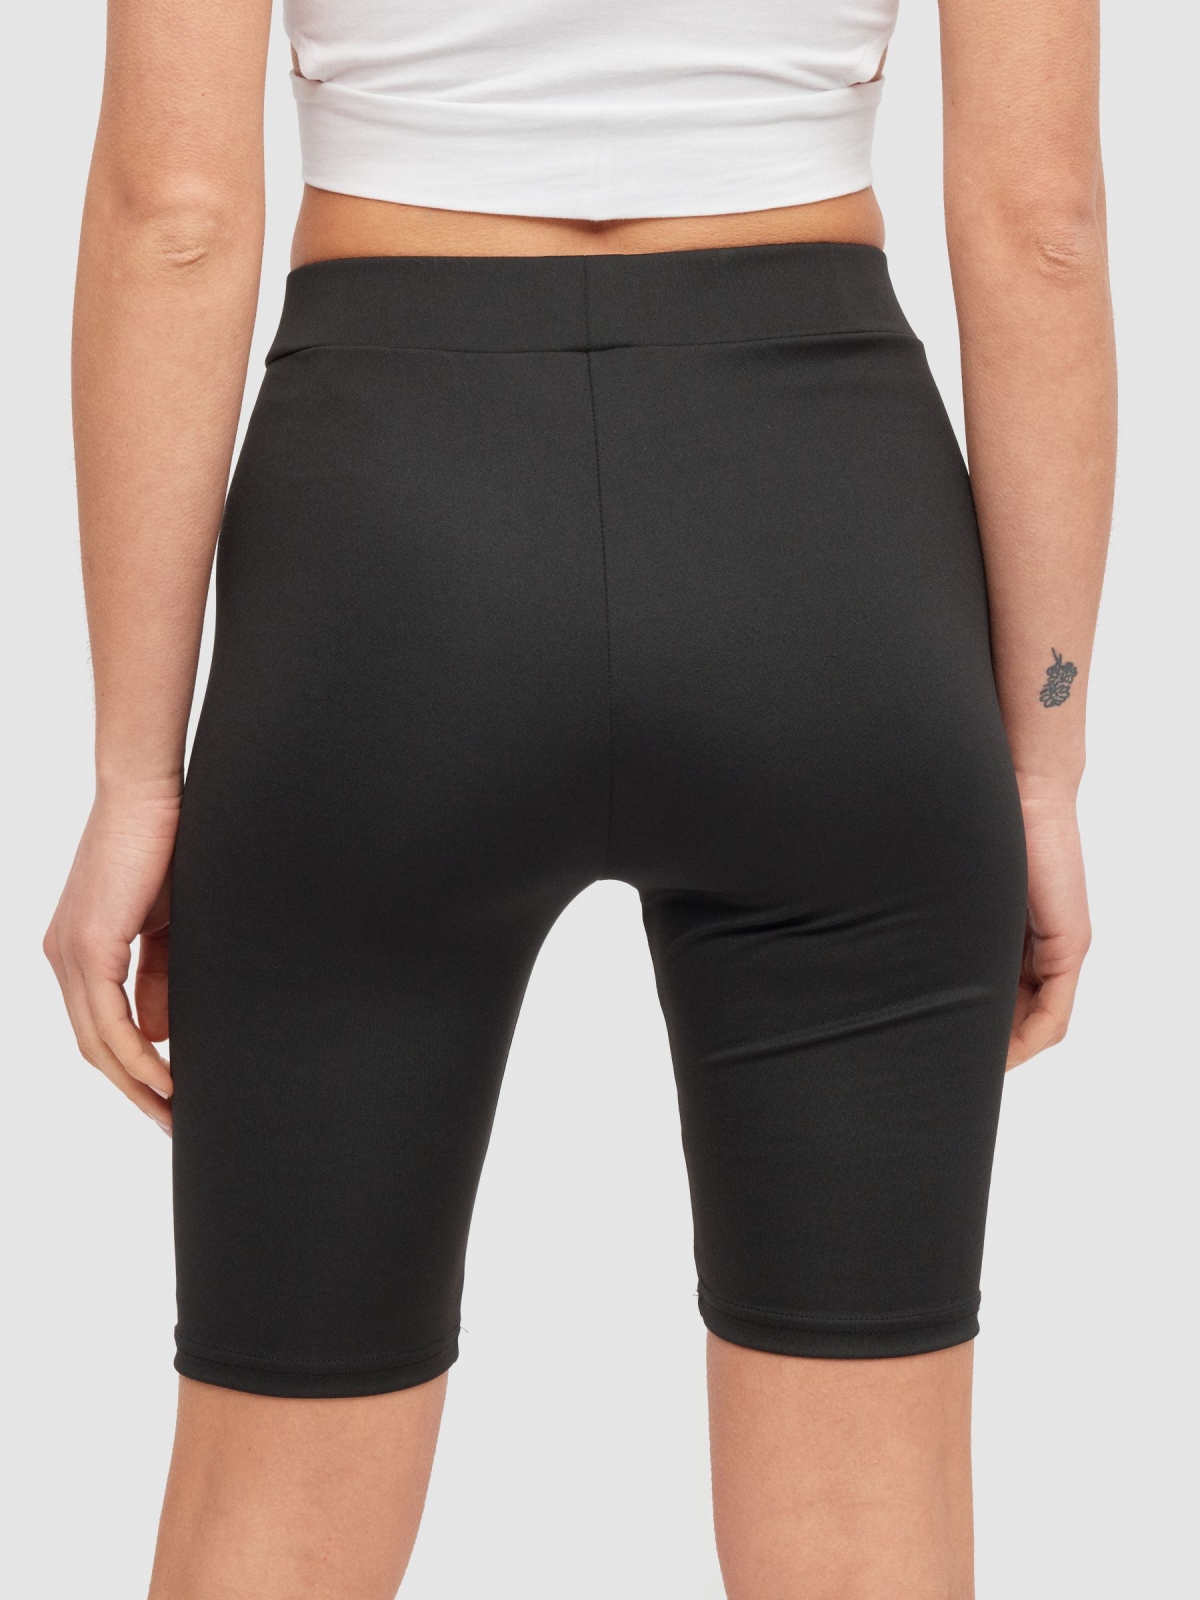 High-waisted cycling leggings black detail view